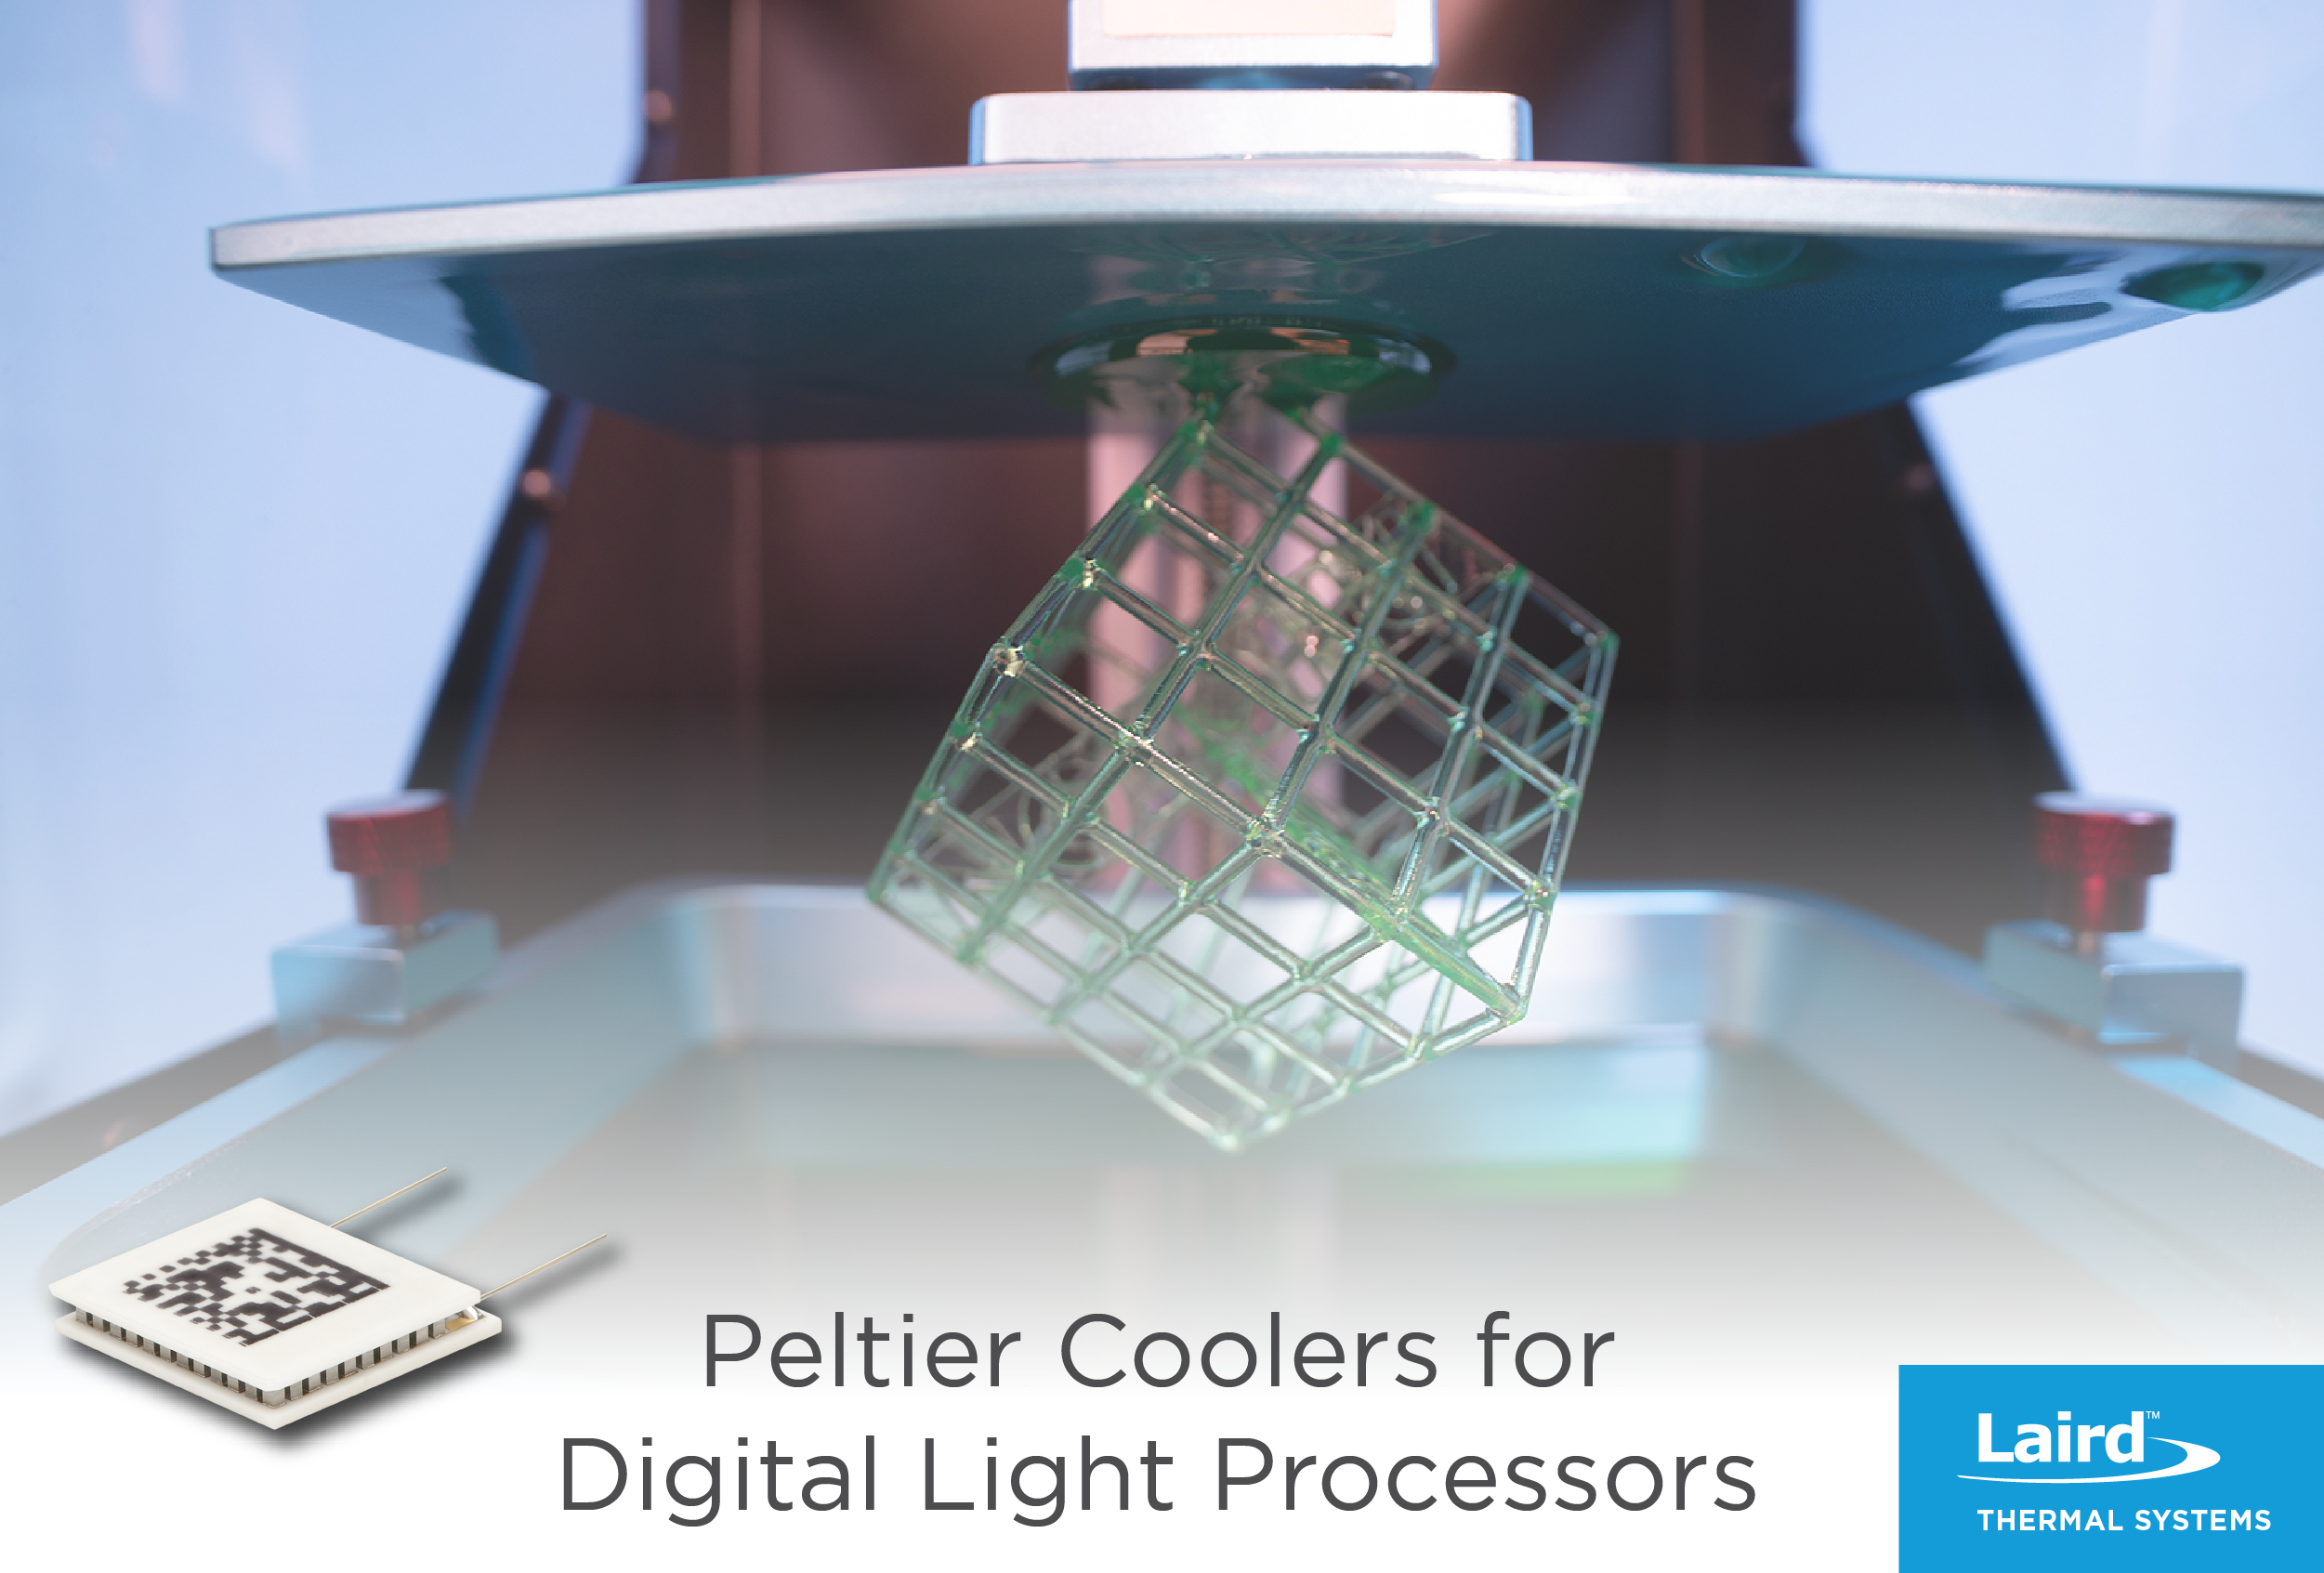 Digital-light-processors-thermoelectric-cooling